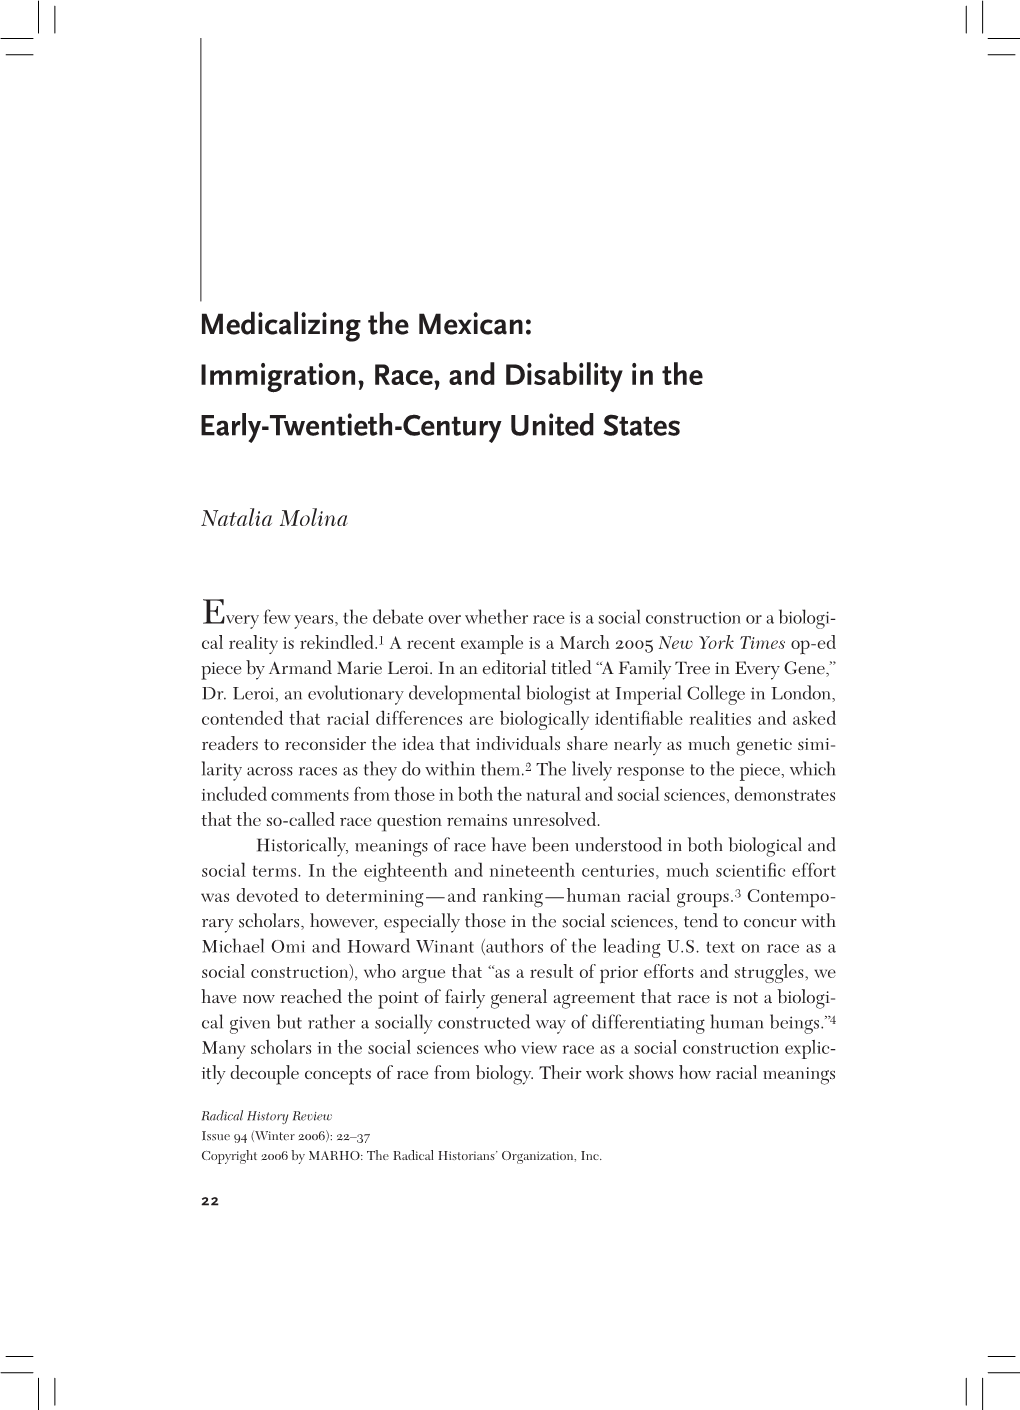 Medicalizing the Mexican: Immigration, Race, and Disability in the Early-Twentieth-Century United States